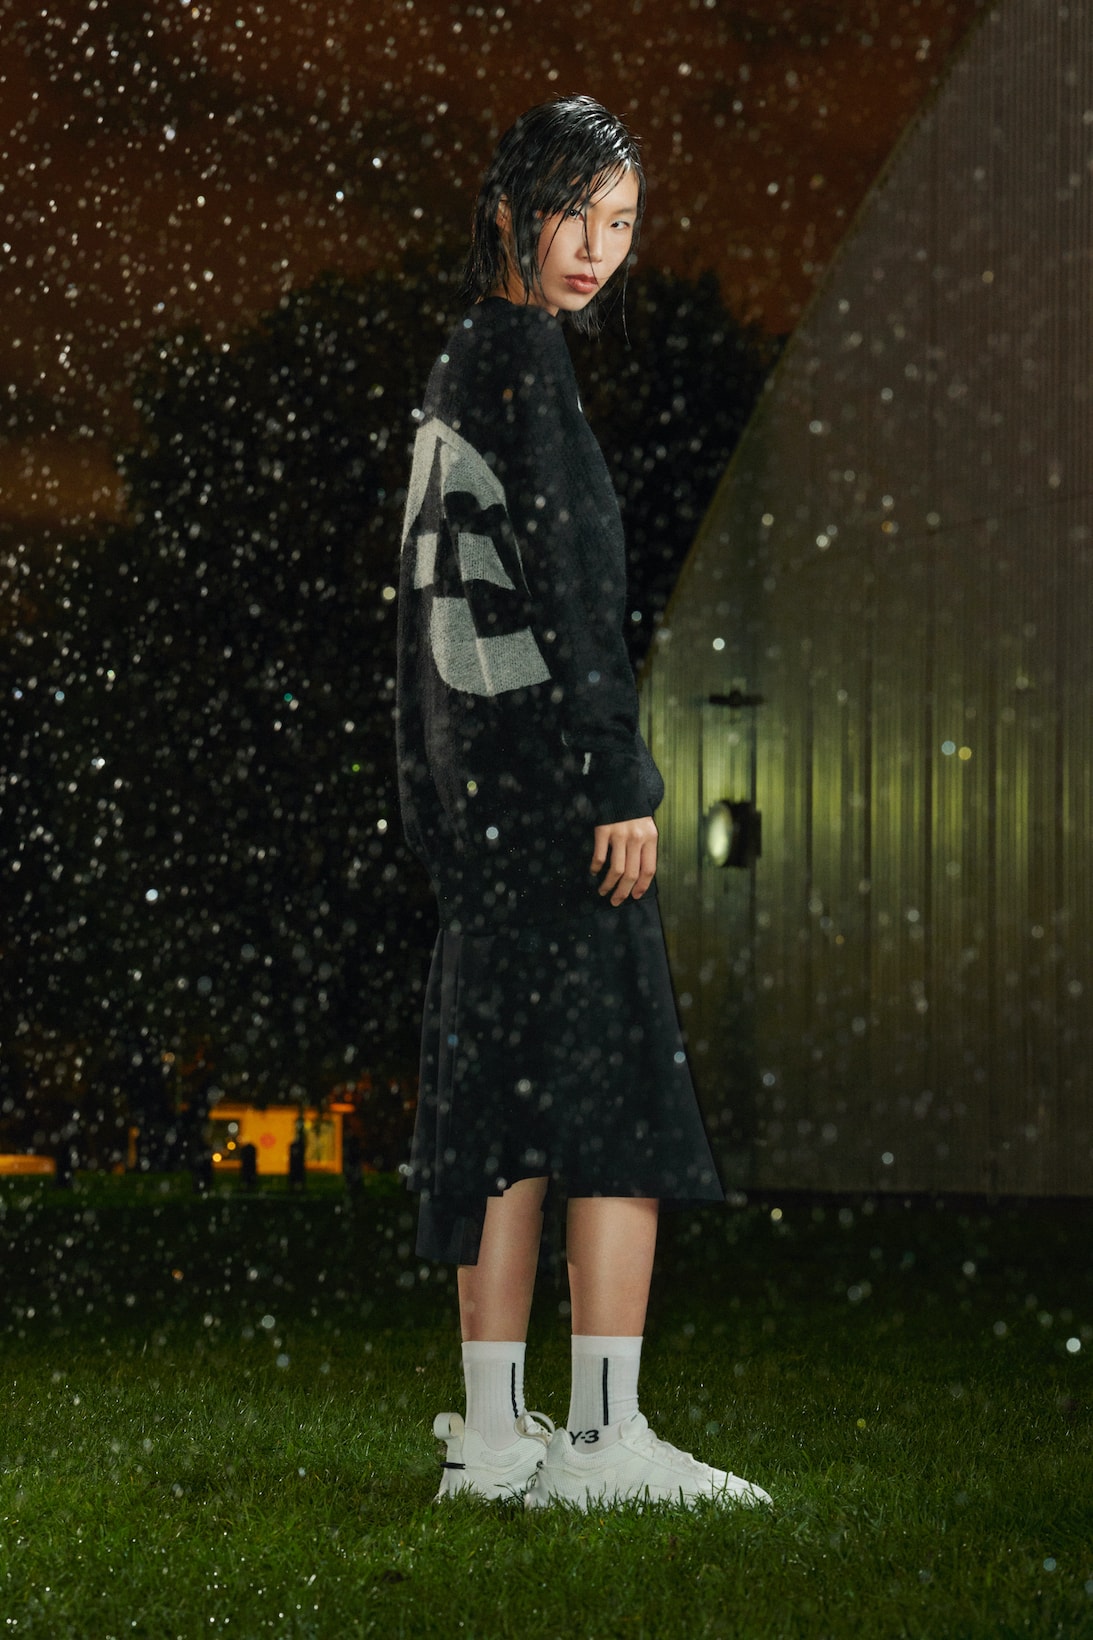 y-3 spring summer collection gore tex outerwear jacket skirt sneakers socks